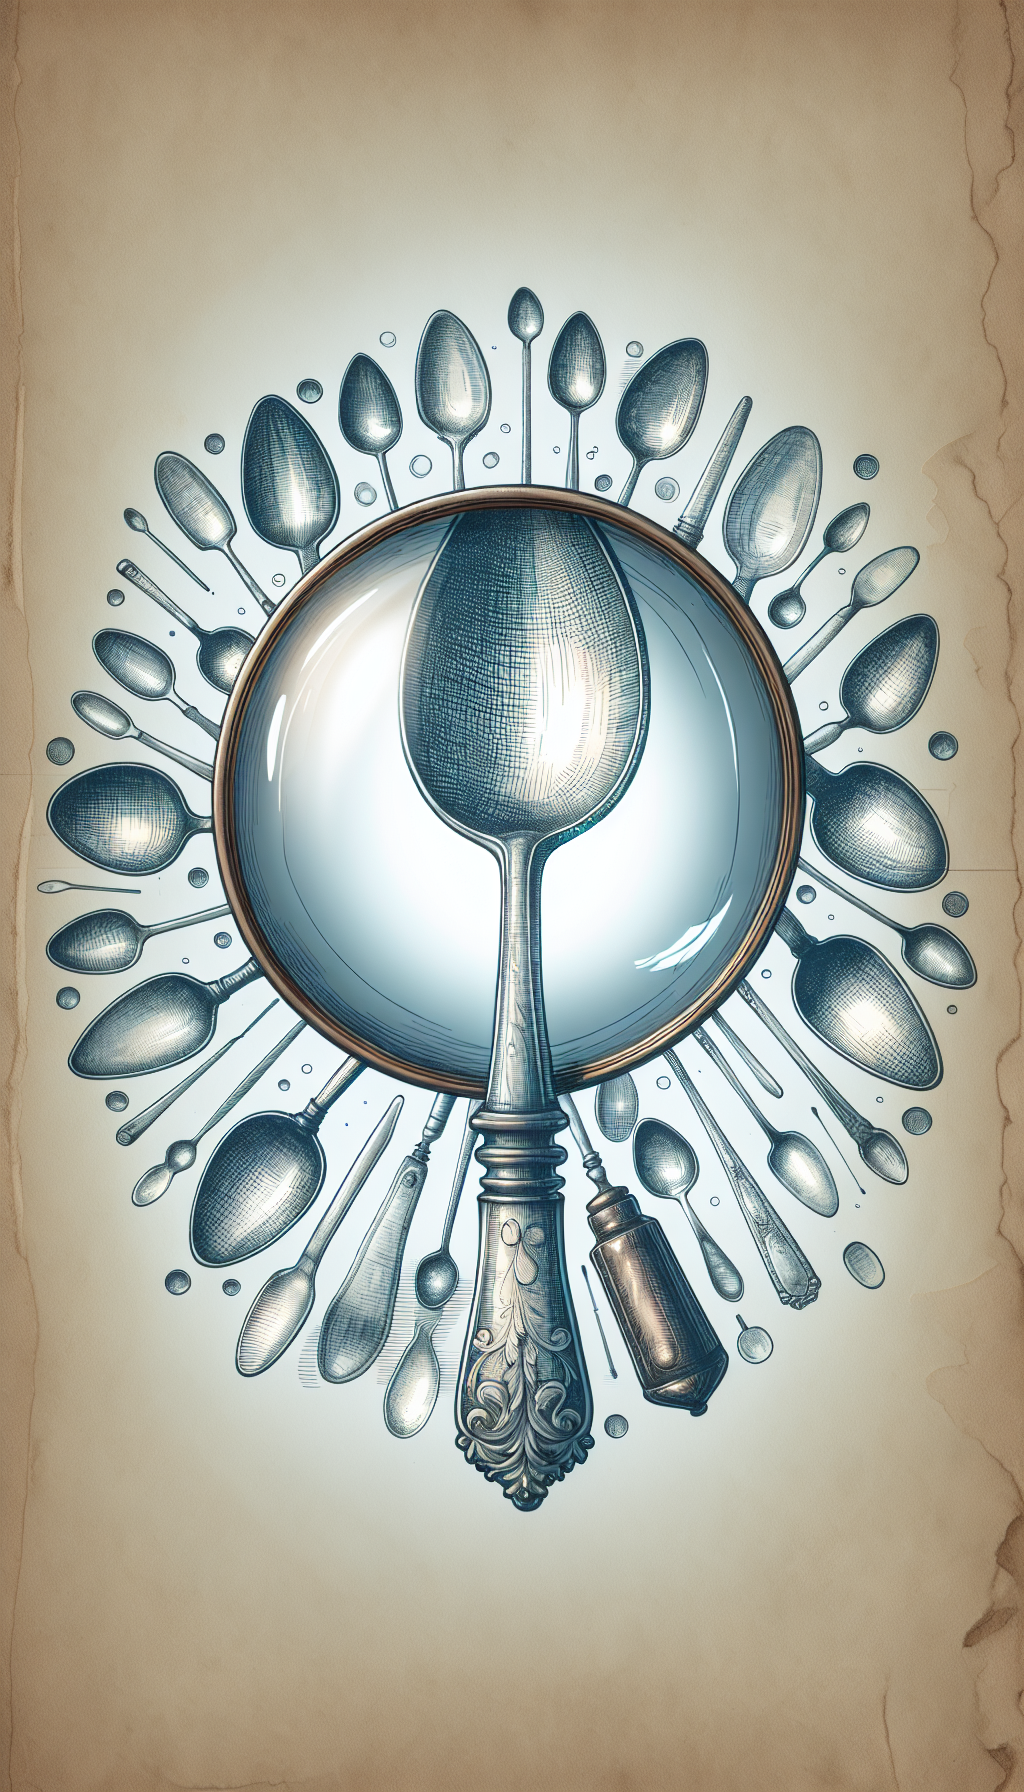 An illustration of an antique spoon encased in a transparent protective bubble, with ghosted images of other unique spoons floating around it. Each ghosted spoon has a magnifying glass overlaid, revealing intricate patterns and hallmarks, symbolizing identification. The differing styles—photorealism for the central spoon, line art for the magnifiers, and watercolor for the background spoons—emphasize the blend of care and expertise required.